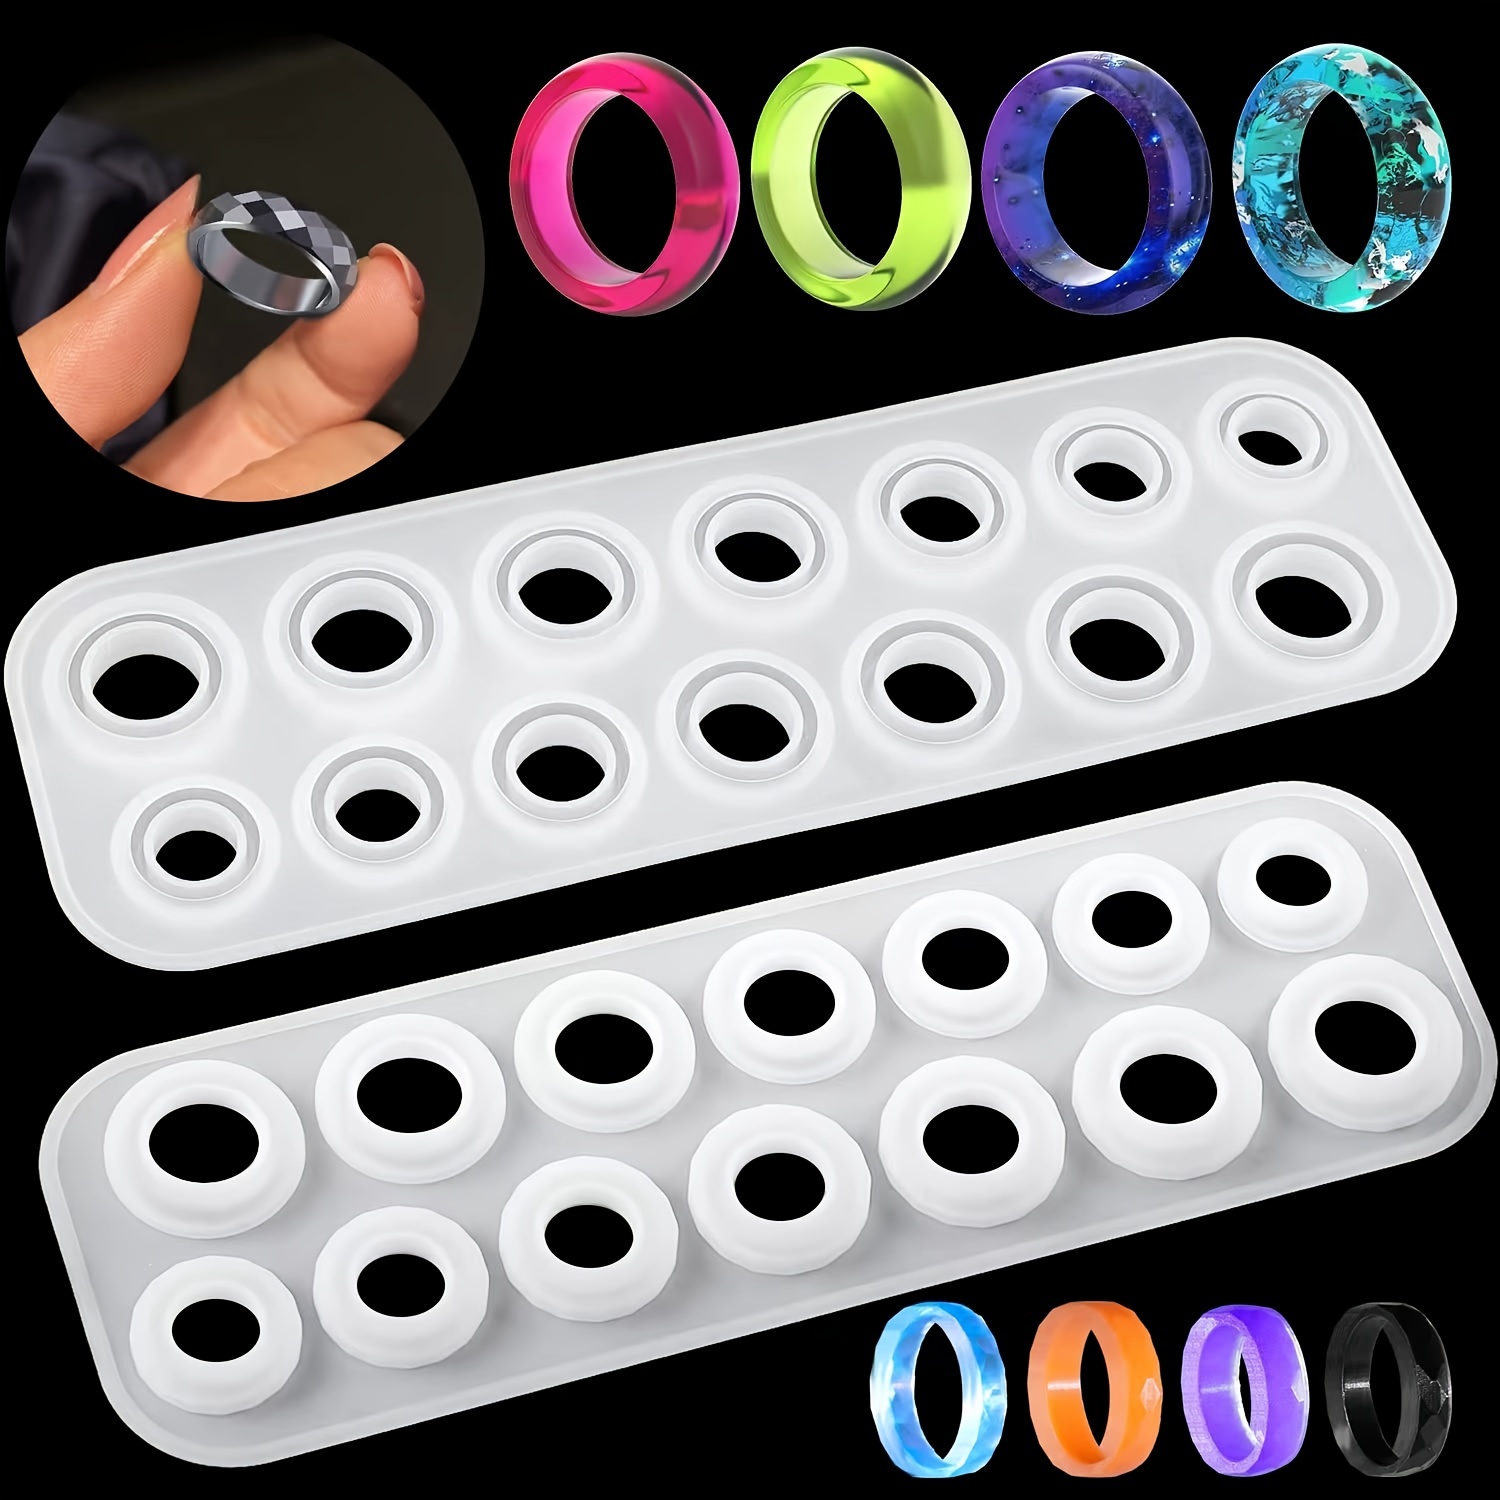 Brass Knuckles Shape Silicone Mold Epoxy Resin Rings Jewelry Accessories  1pc Set 